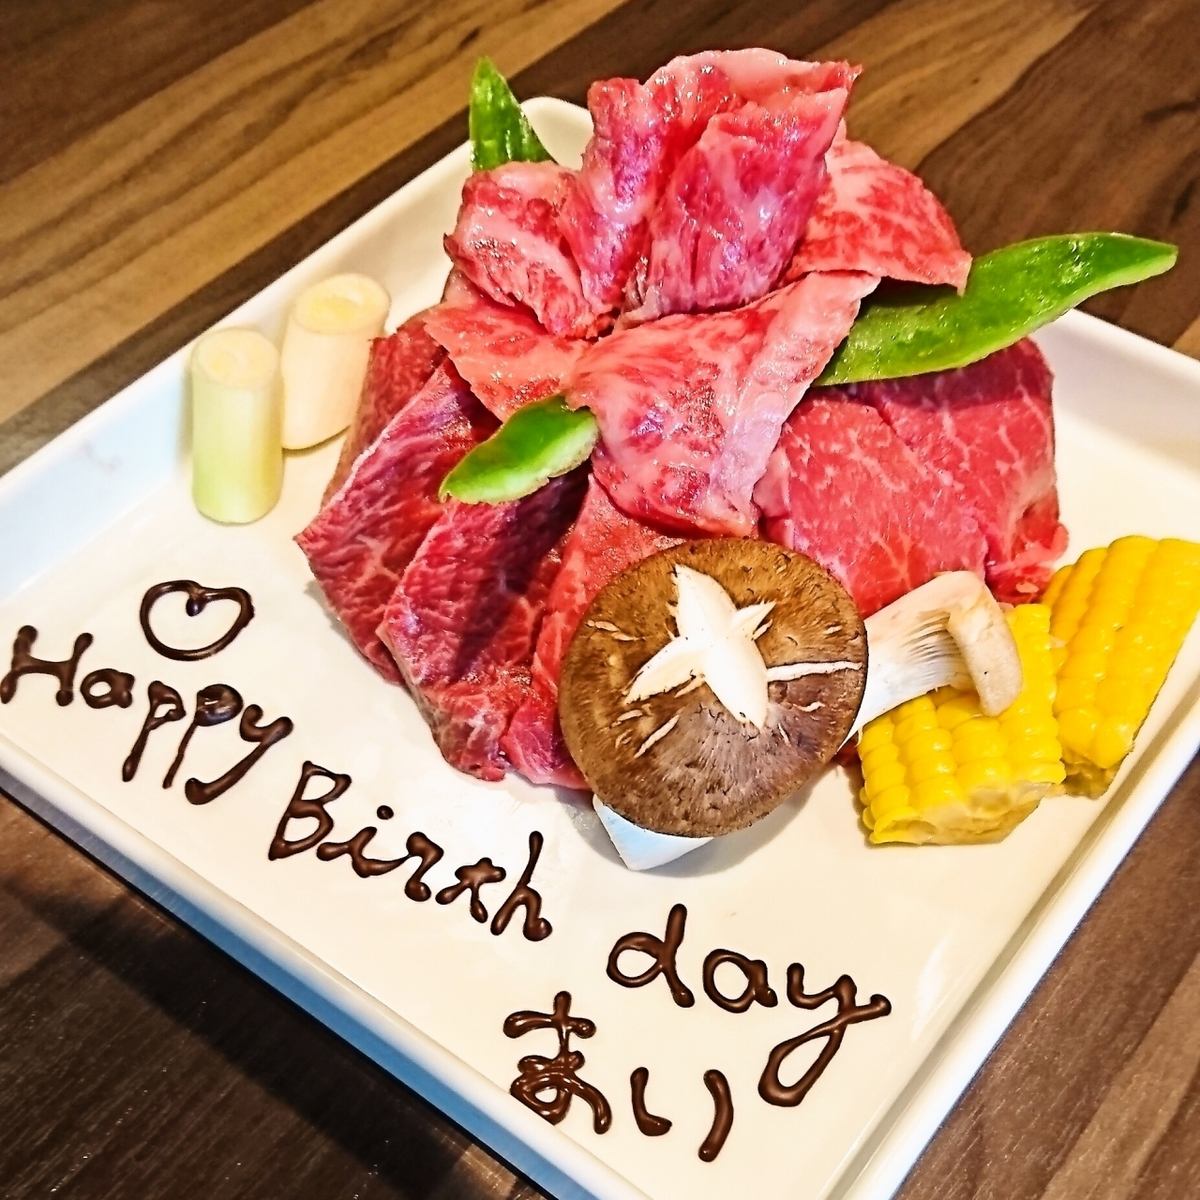 We can offer you a meat cake with a message! Instagrammable♪